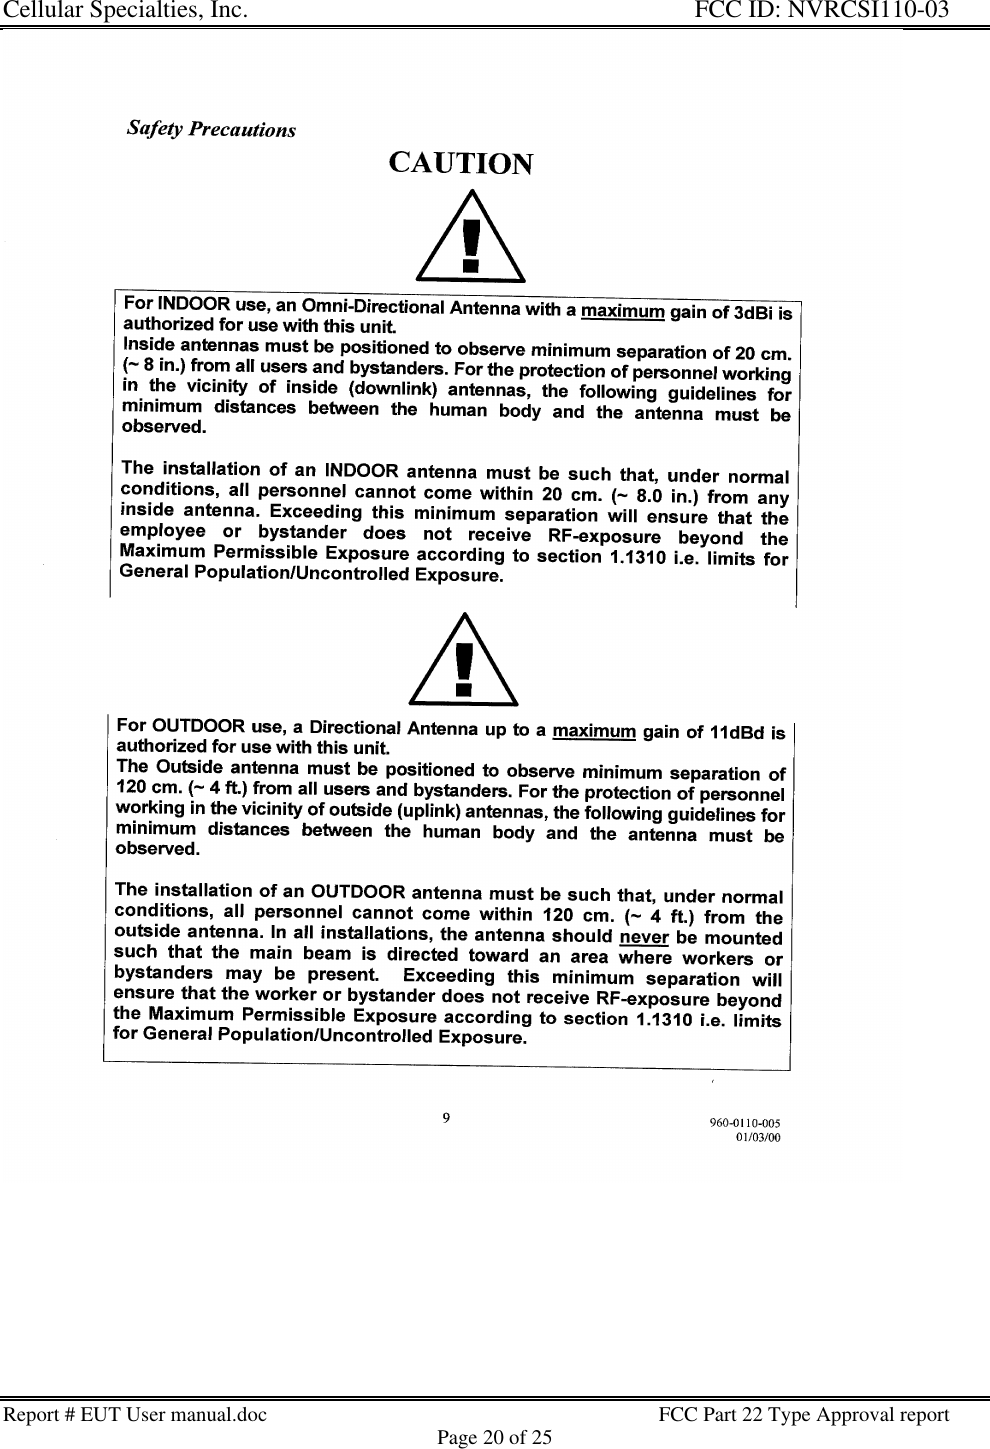 Cellular Specialties, Inc. FCC ID: NVRCSI110-03Report # EUT User manual.doc FCC Part 22 Type Approval reportPage 20 of 25